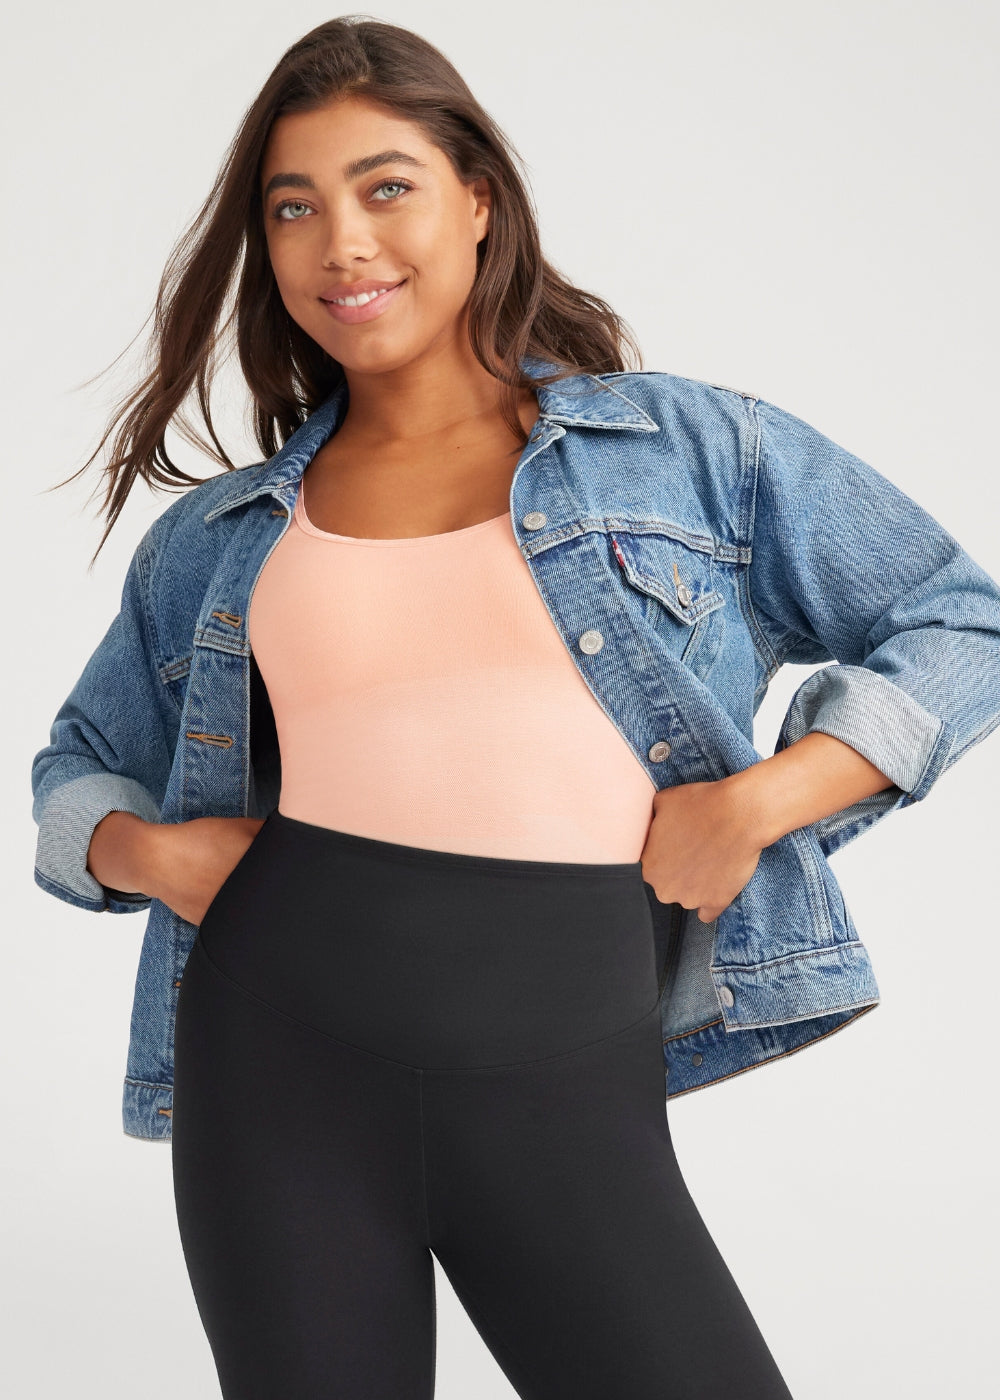 2-way shaping tank - outlast® seamless in english rose worn by a woman under a jean jacket with white pants, standing with her left hand on her hip